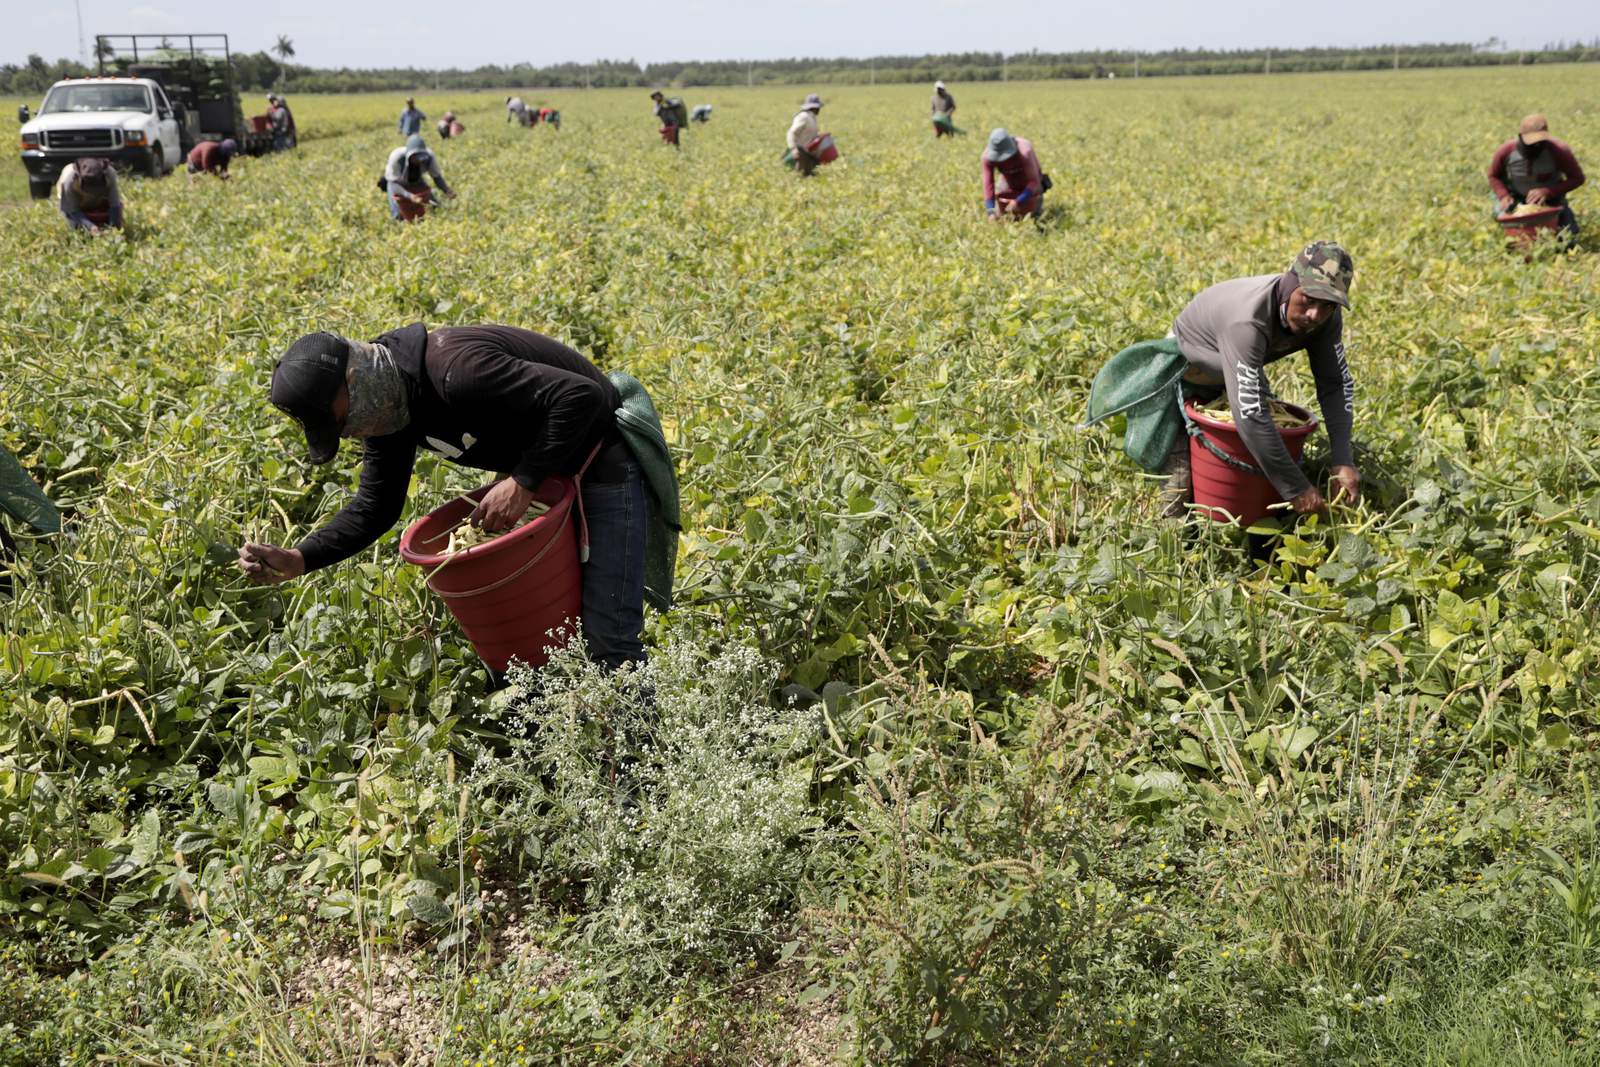 Clinics wait to vaccinate farmworkers: 'Our hands are tied'